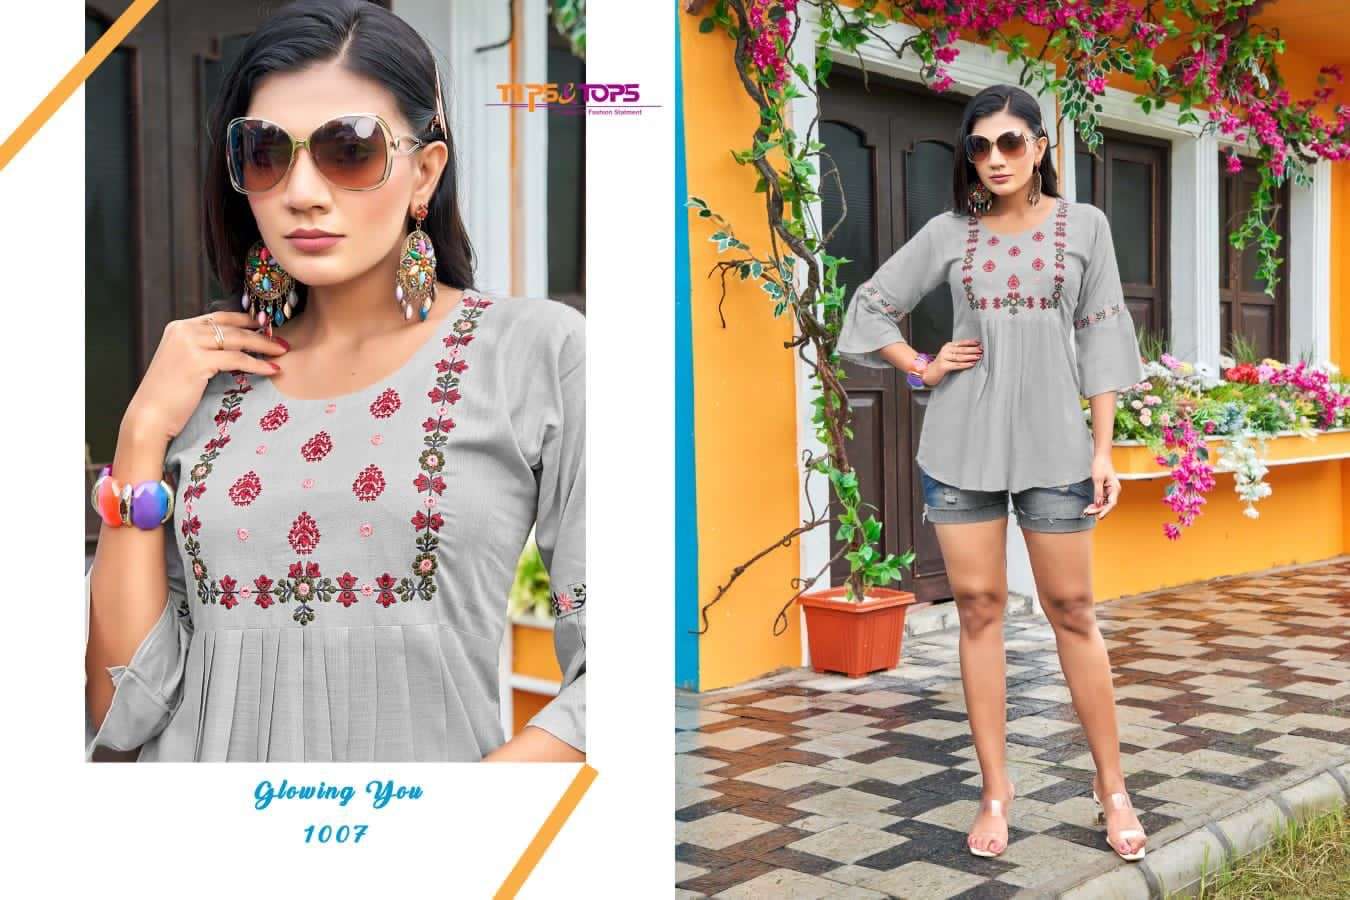 tips and tops pulpy vol 9 1001-1008 series fancy short tops collection wholesale price surat